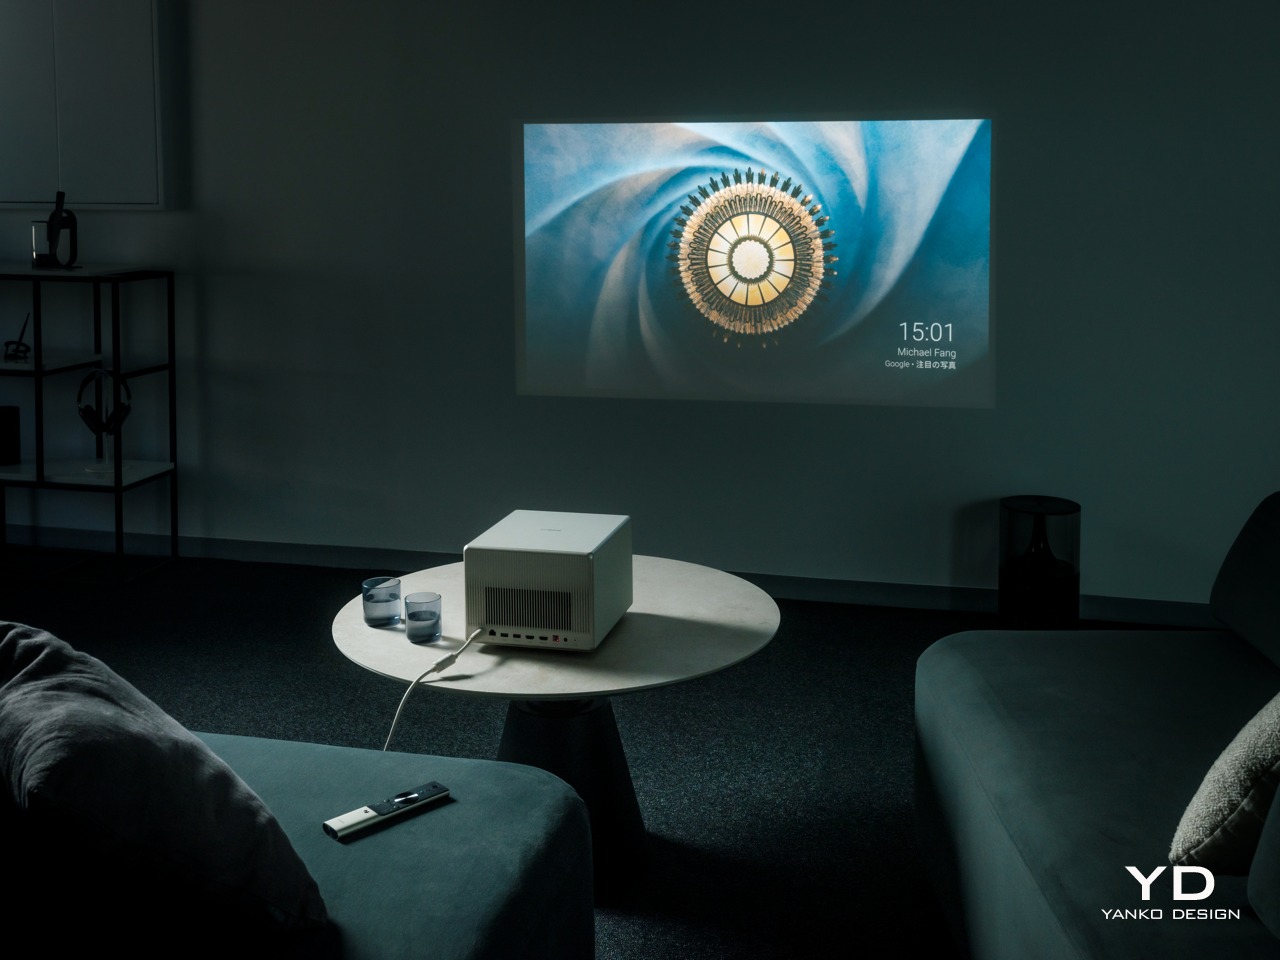 XGIMI TO SHOW NEW PROJECTOR AT CES FEATURING UPGRADED INTELLIGENT SCREEN  ADAPTATION TECHNOLOGY